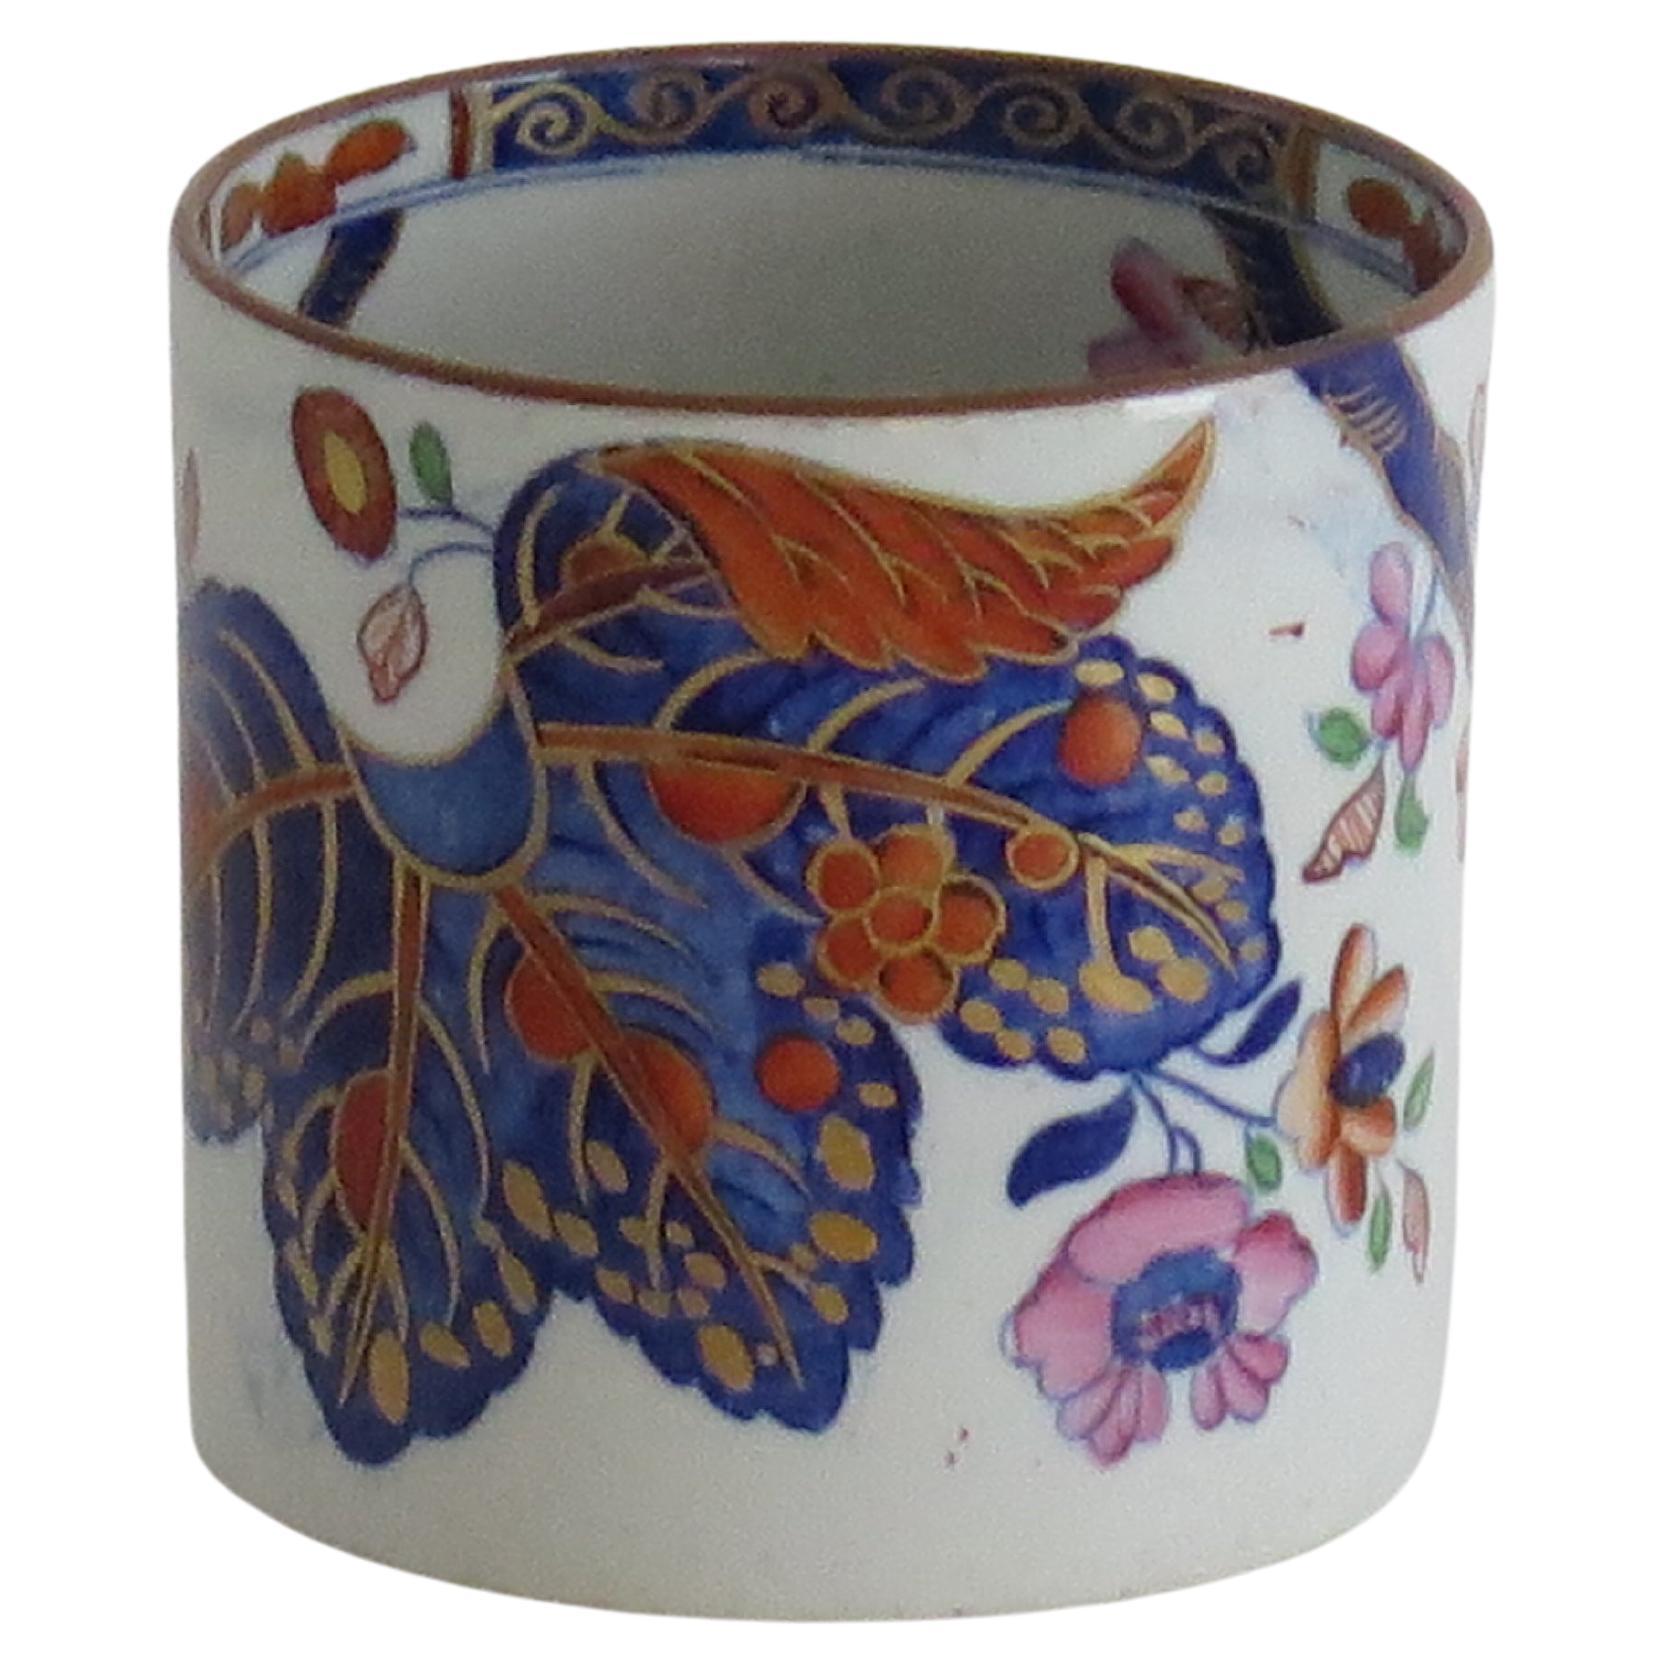 This is a very good stone China (Ironstone) coffee can hand painted in the tobacco leaf pattern, number 2061, made by the Spode factory in the early 19th century, English Georgian period, circa 1820.

This coffee can or cup made from Ironstone China